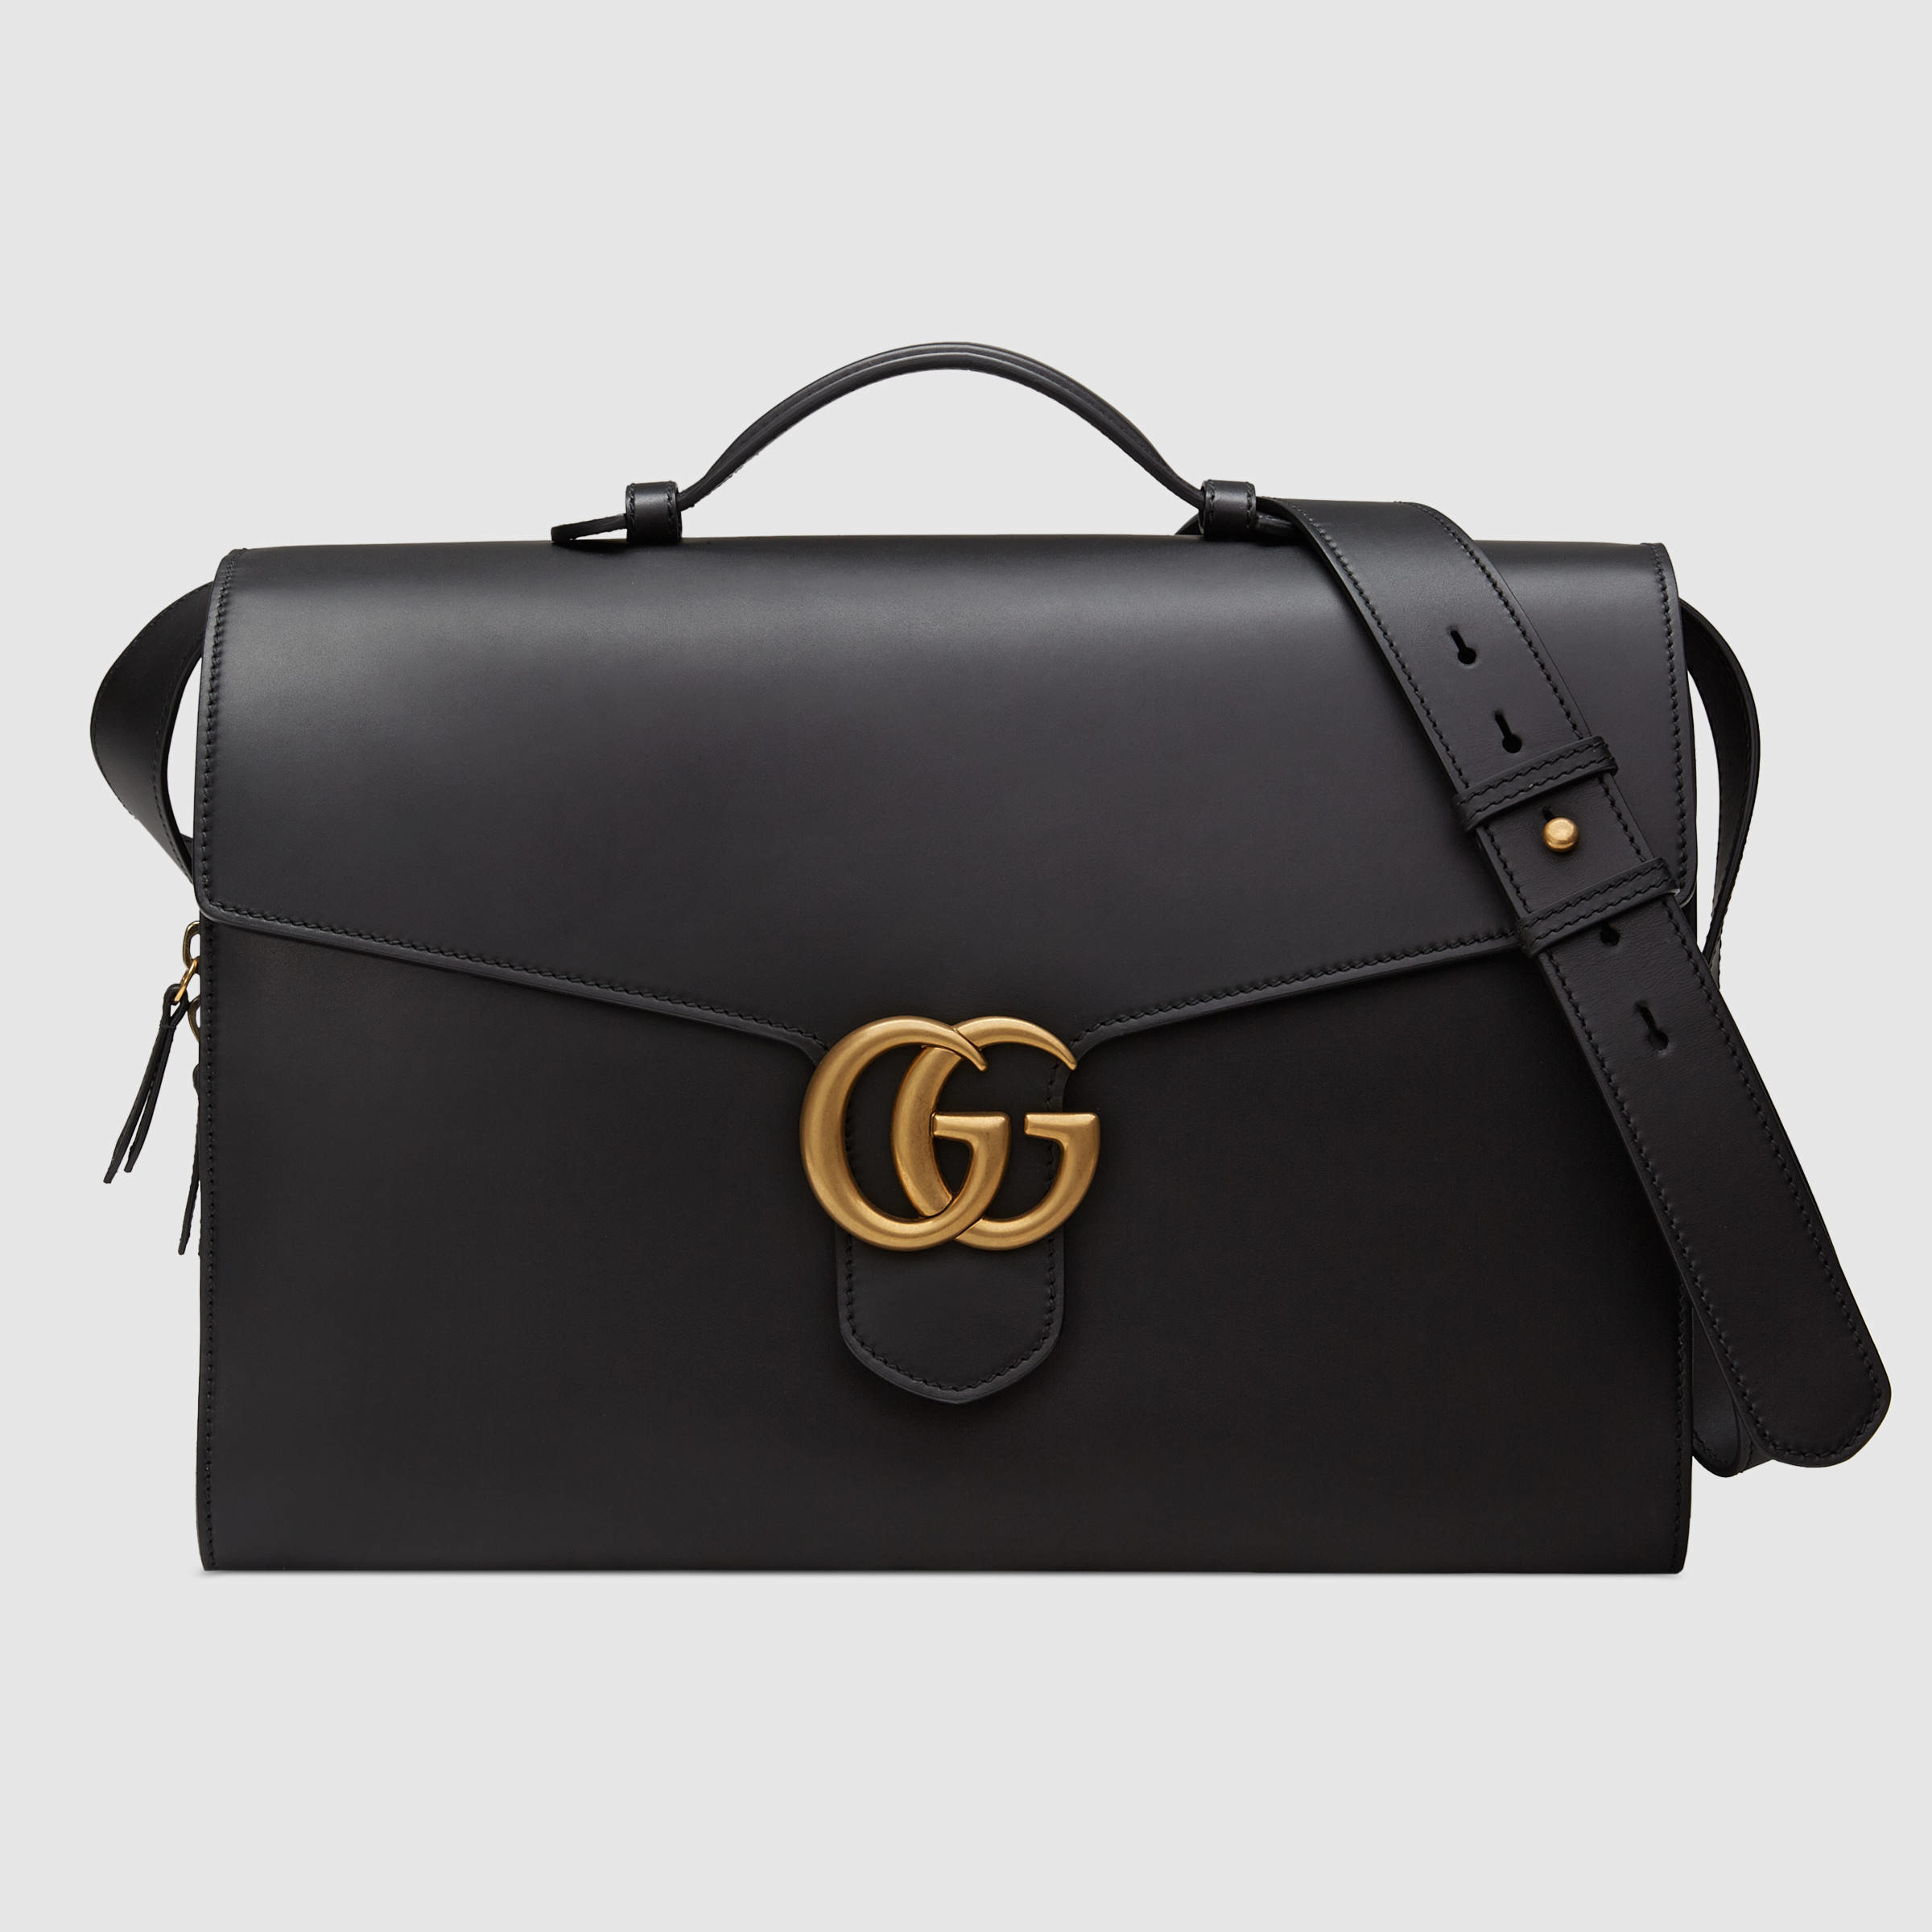 GUCCI Leather Business Briefcase Bag Black 387074-US